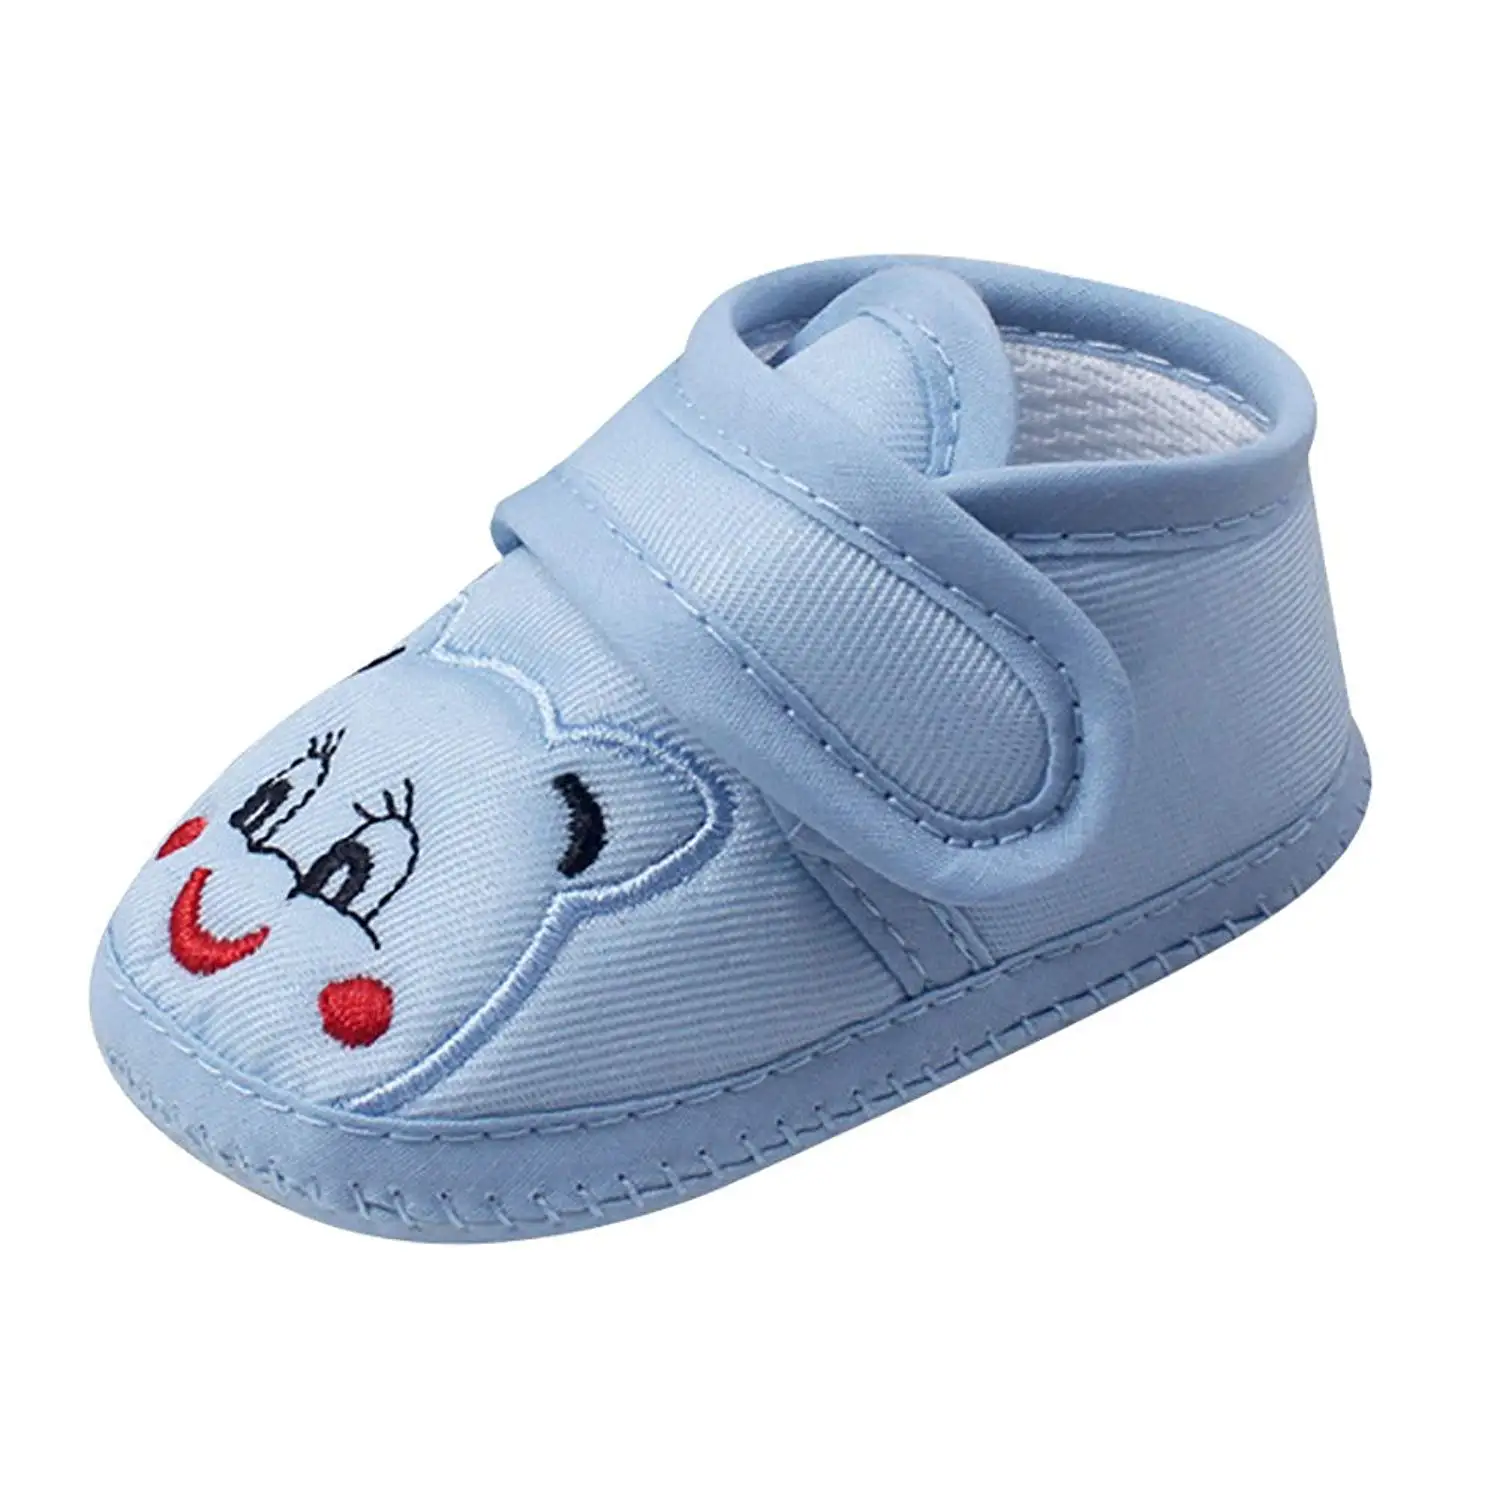 12 month old baby boy shoes